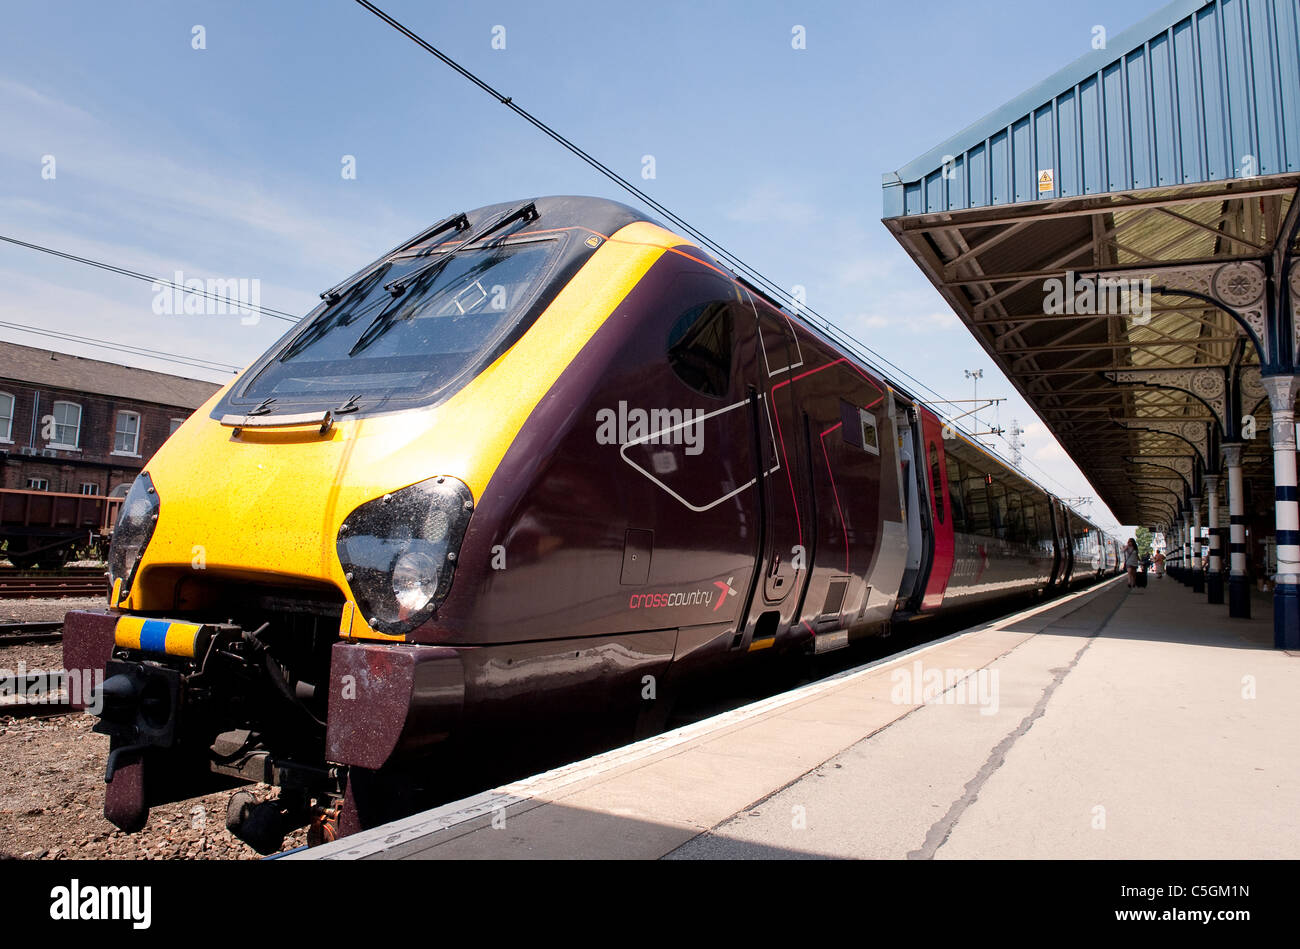 Voyager train in Crosscountry trains livery at a railway station in England. Stock Photo